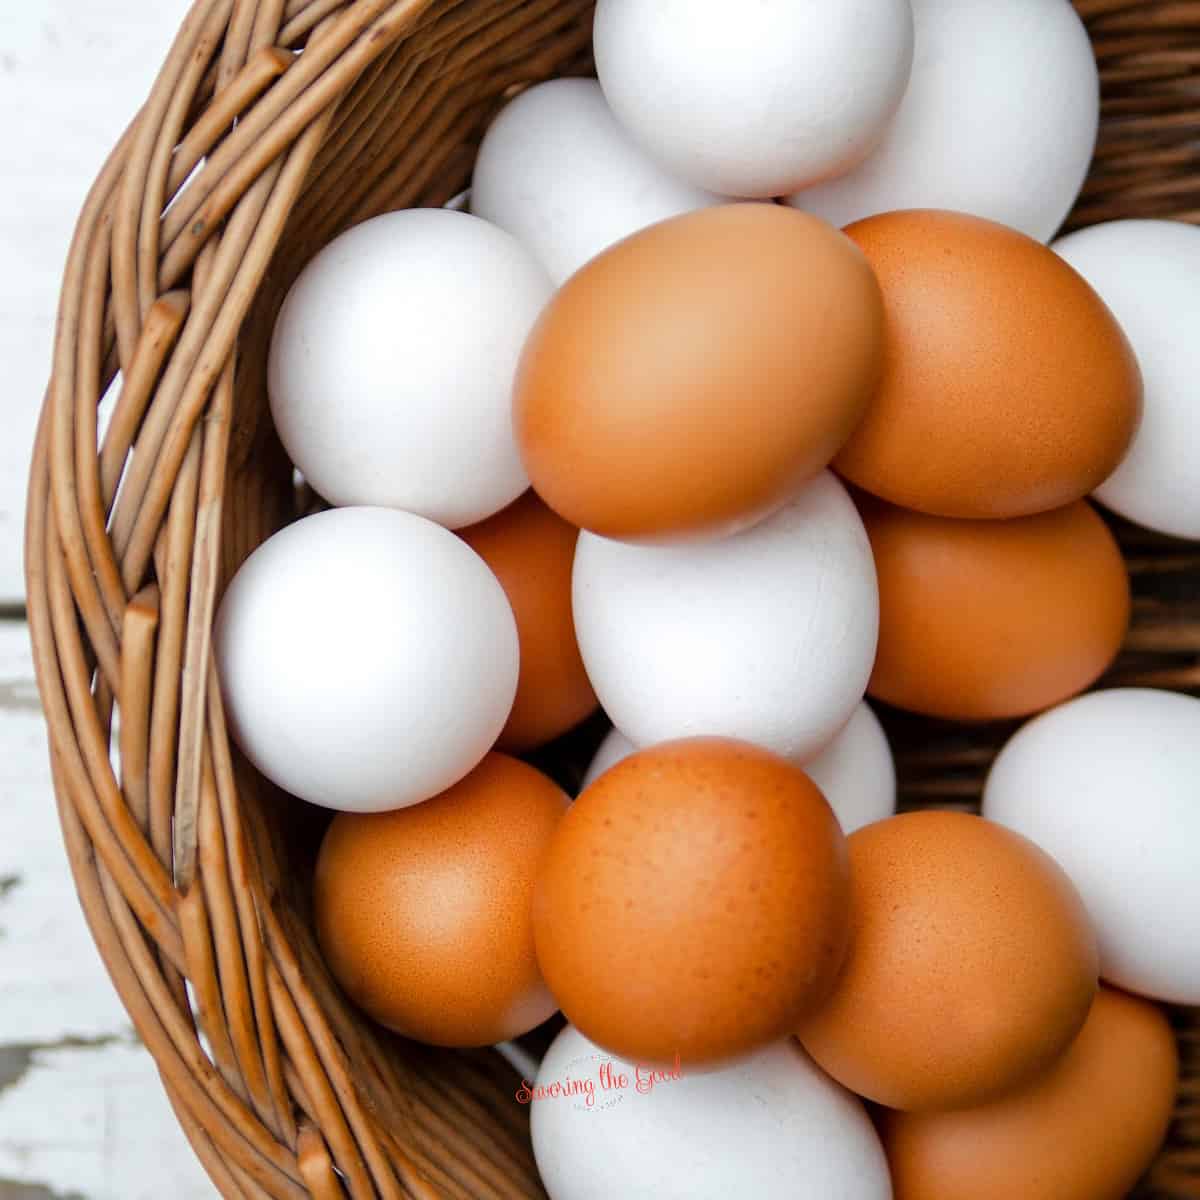 White and brown eggs in a wicker basket, showcasing 100 ways to prepare an egg.